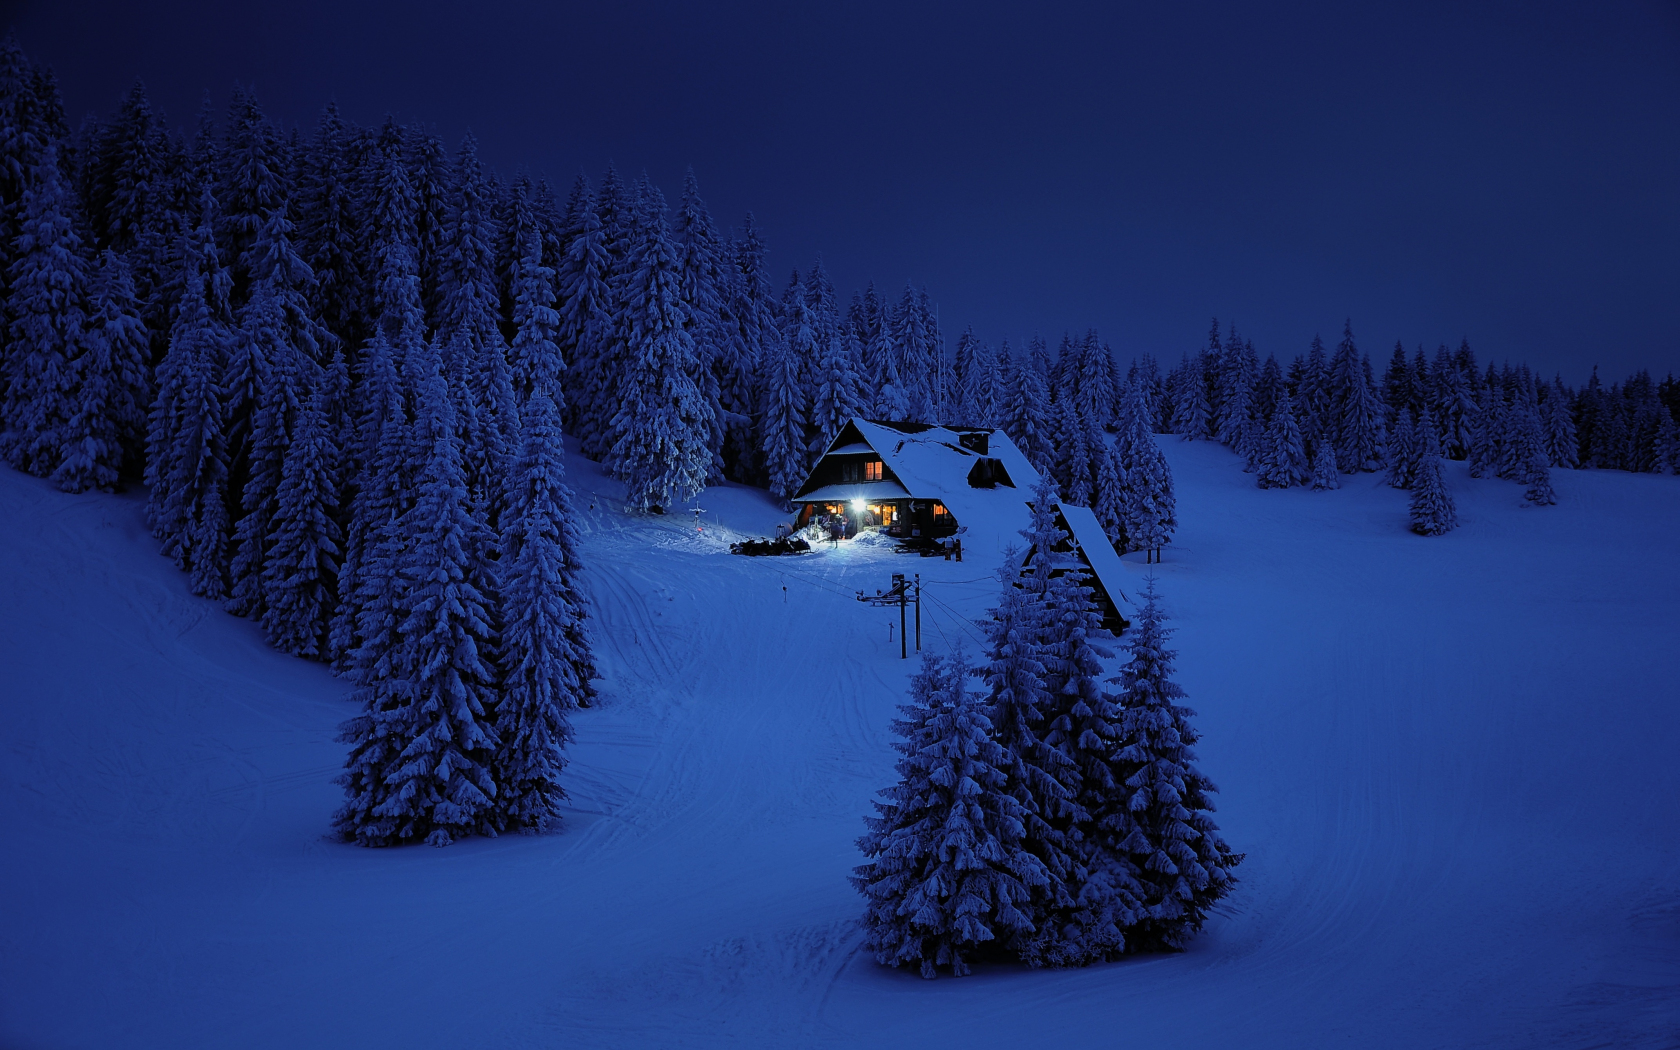 Download wallpaper 1680x1050 house, night, winter, trees, snow layer, nature, 16:10 widescreen 1680x1050 HD background, 7241